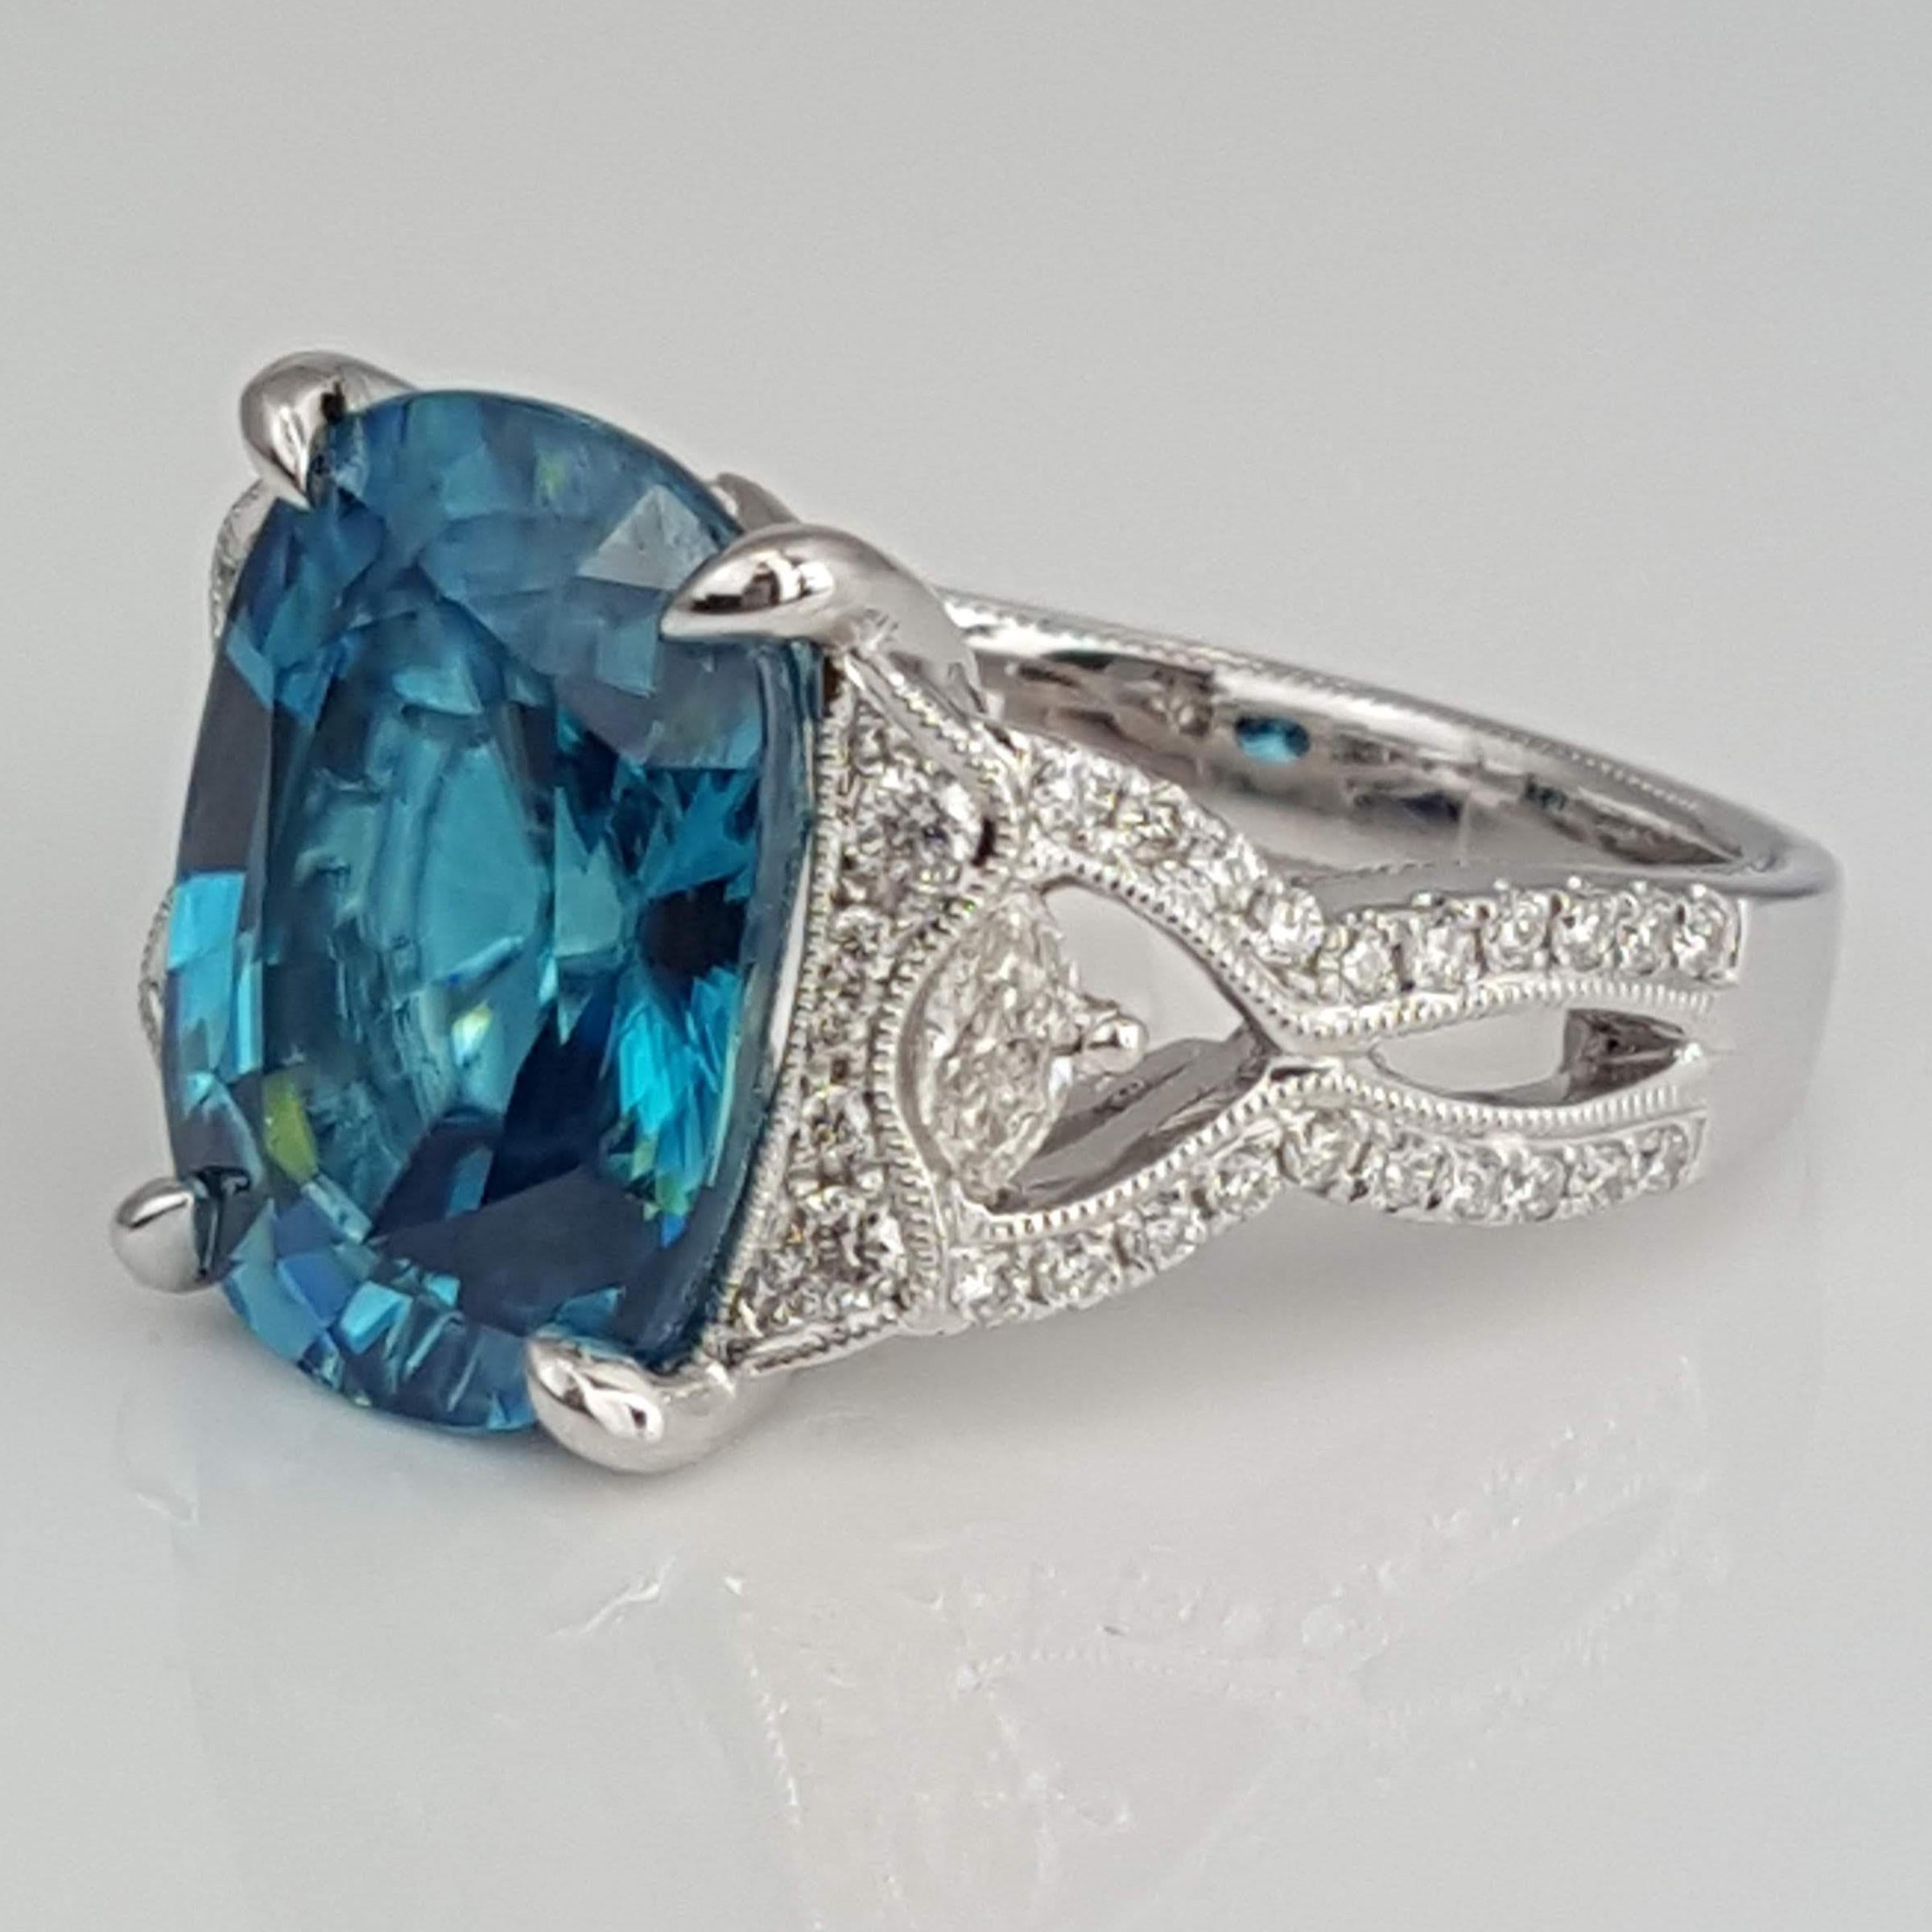 Women's 9.98 Ct Oval Cut Blue Zircon and 0.54 Carat Natural Diamond Ring in 18W ref1361 For Sale